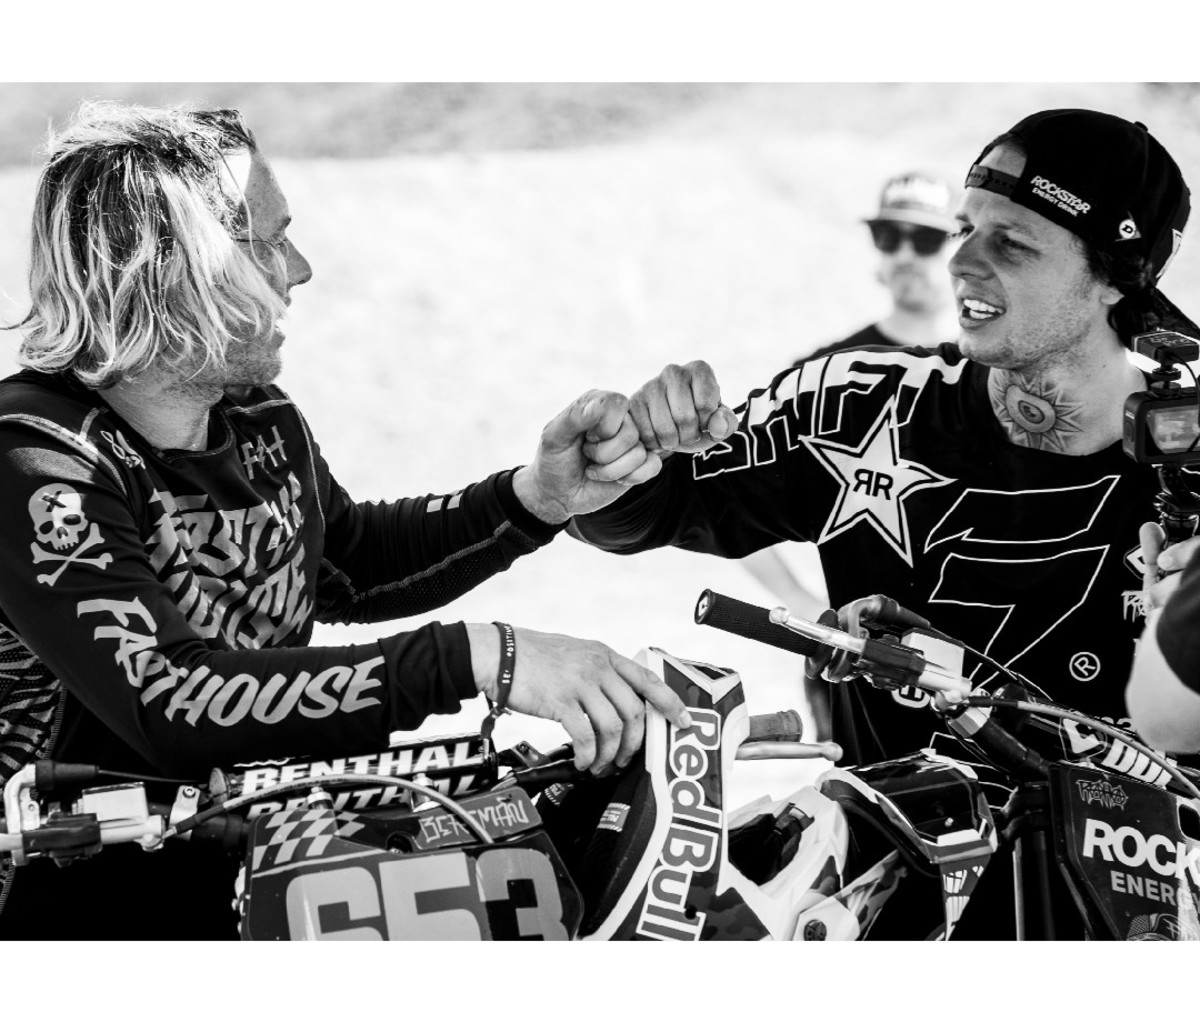 Two male motocross racers fist bump